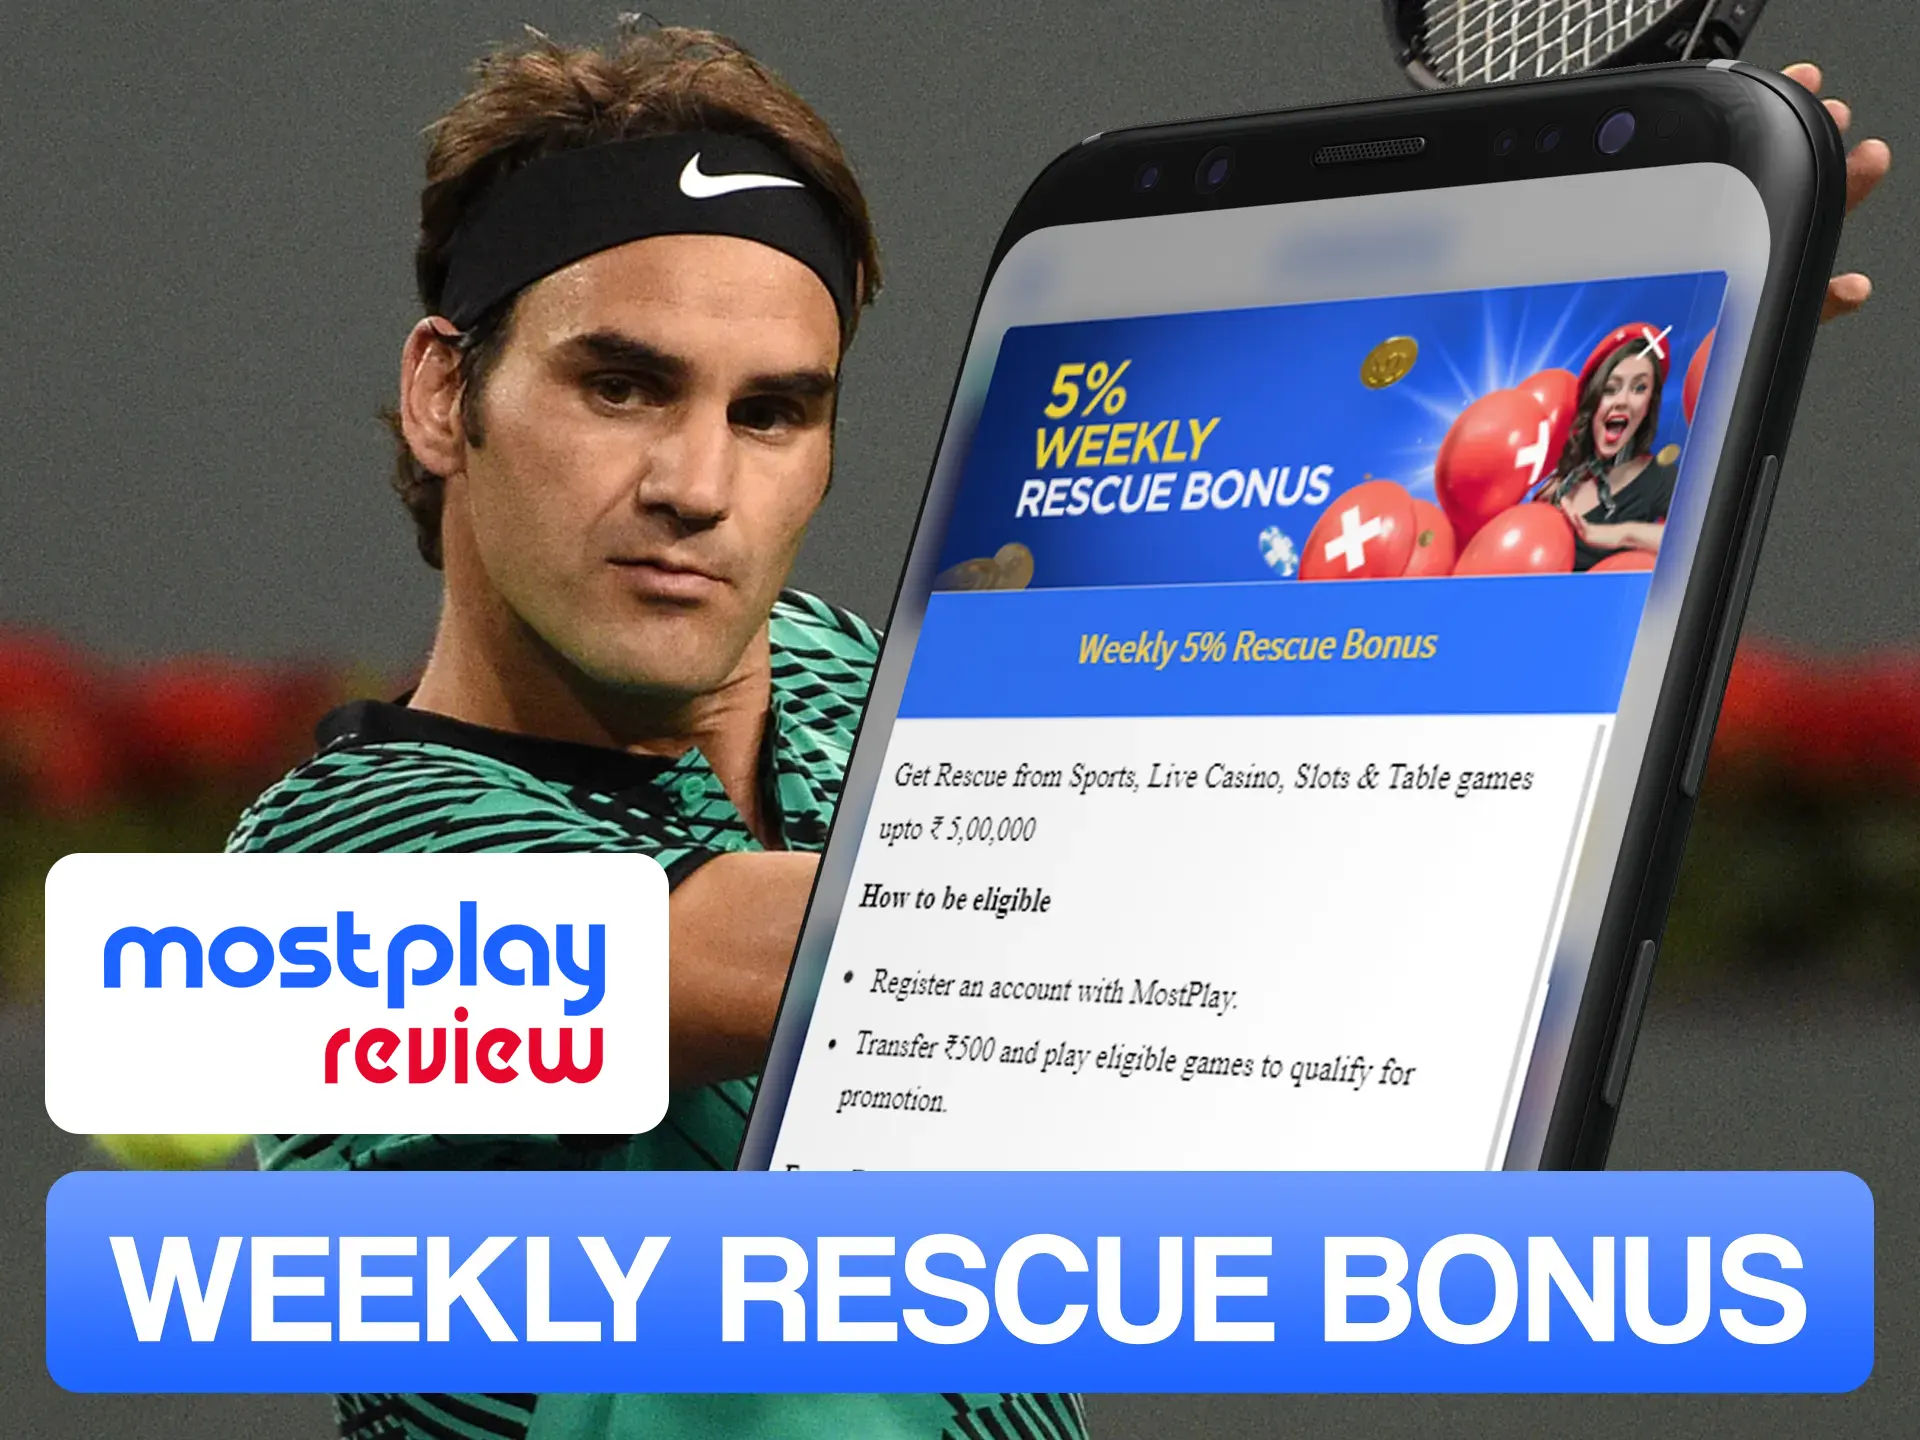 Don't forget to use Mostplay weekly rescue bonus.